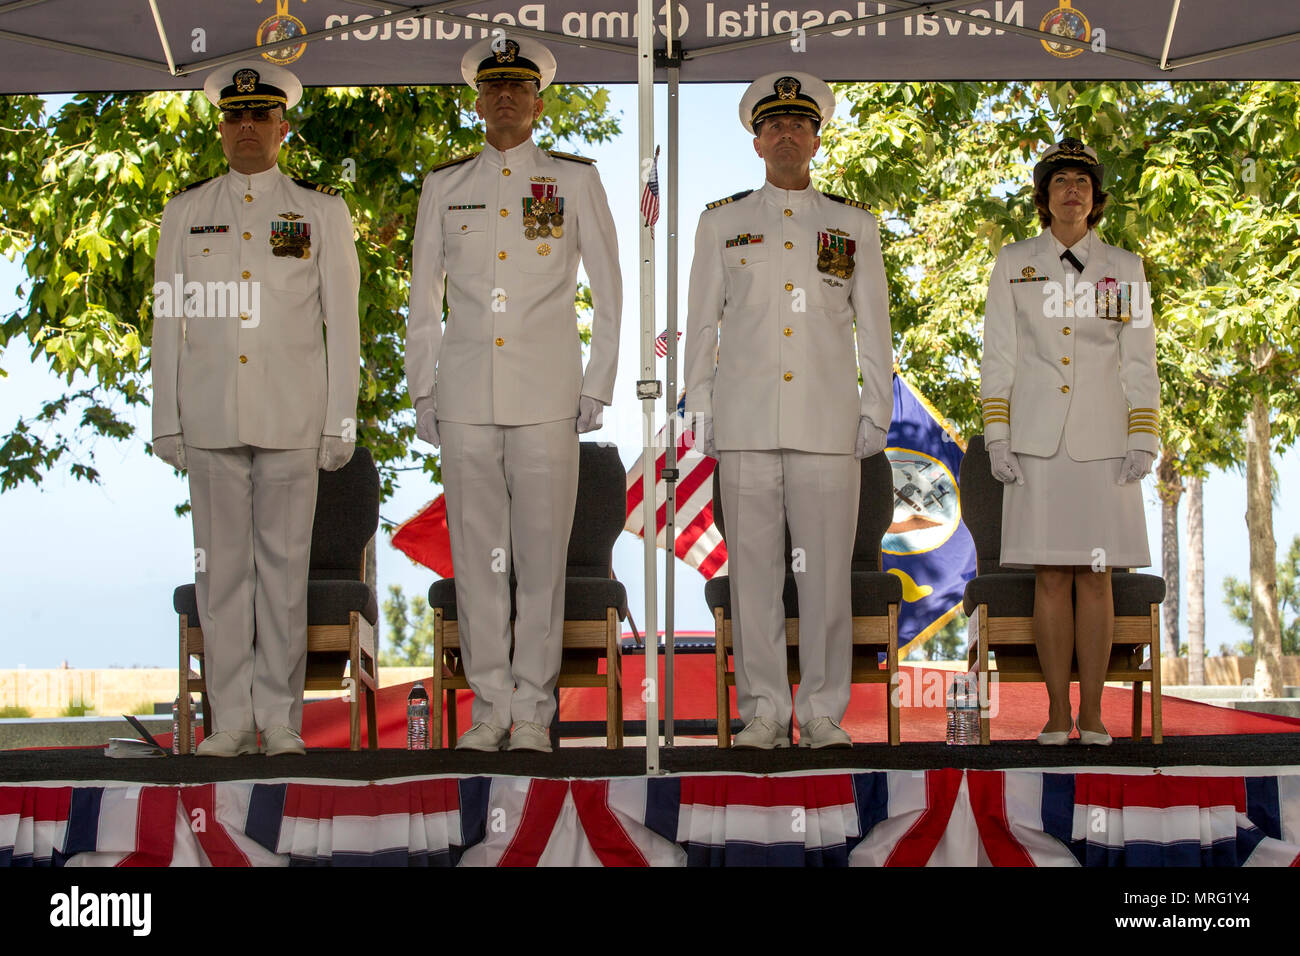 US. Naval officers honor the colors during a Change of Command Ceremony for Naval Hospital Camp Pendleton on Camp Pendleton, Calif., June 14, 2017. Capt. Frank Pearson relieved Capt. Lisa Mulligan as commanding officer during the ceremony. (U.S. Marine Corps photo by Cpl. Brandon Martinez) Stock Photo